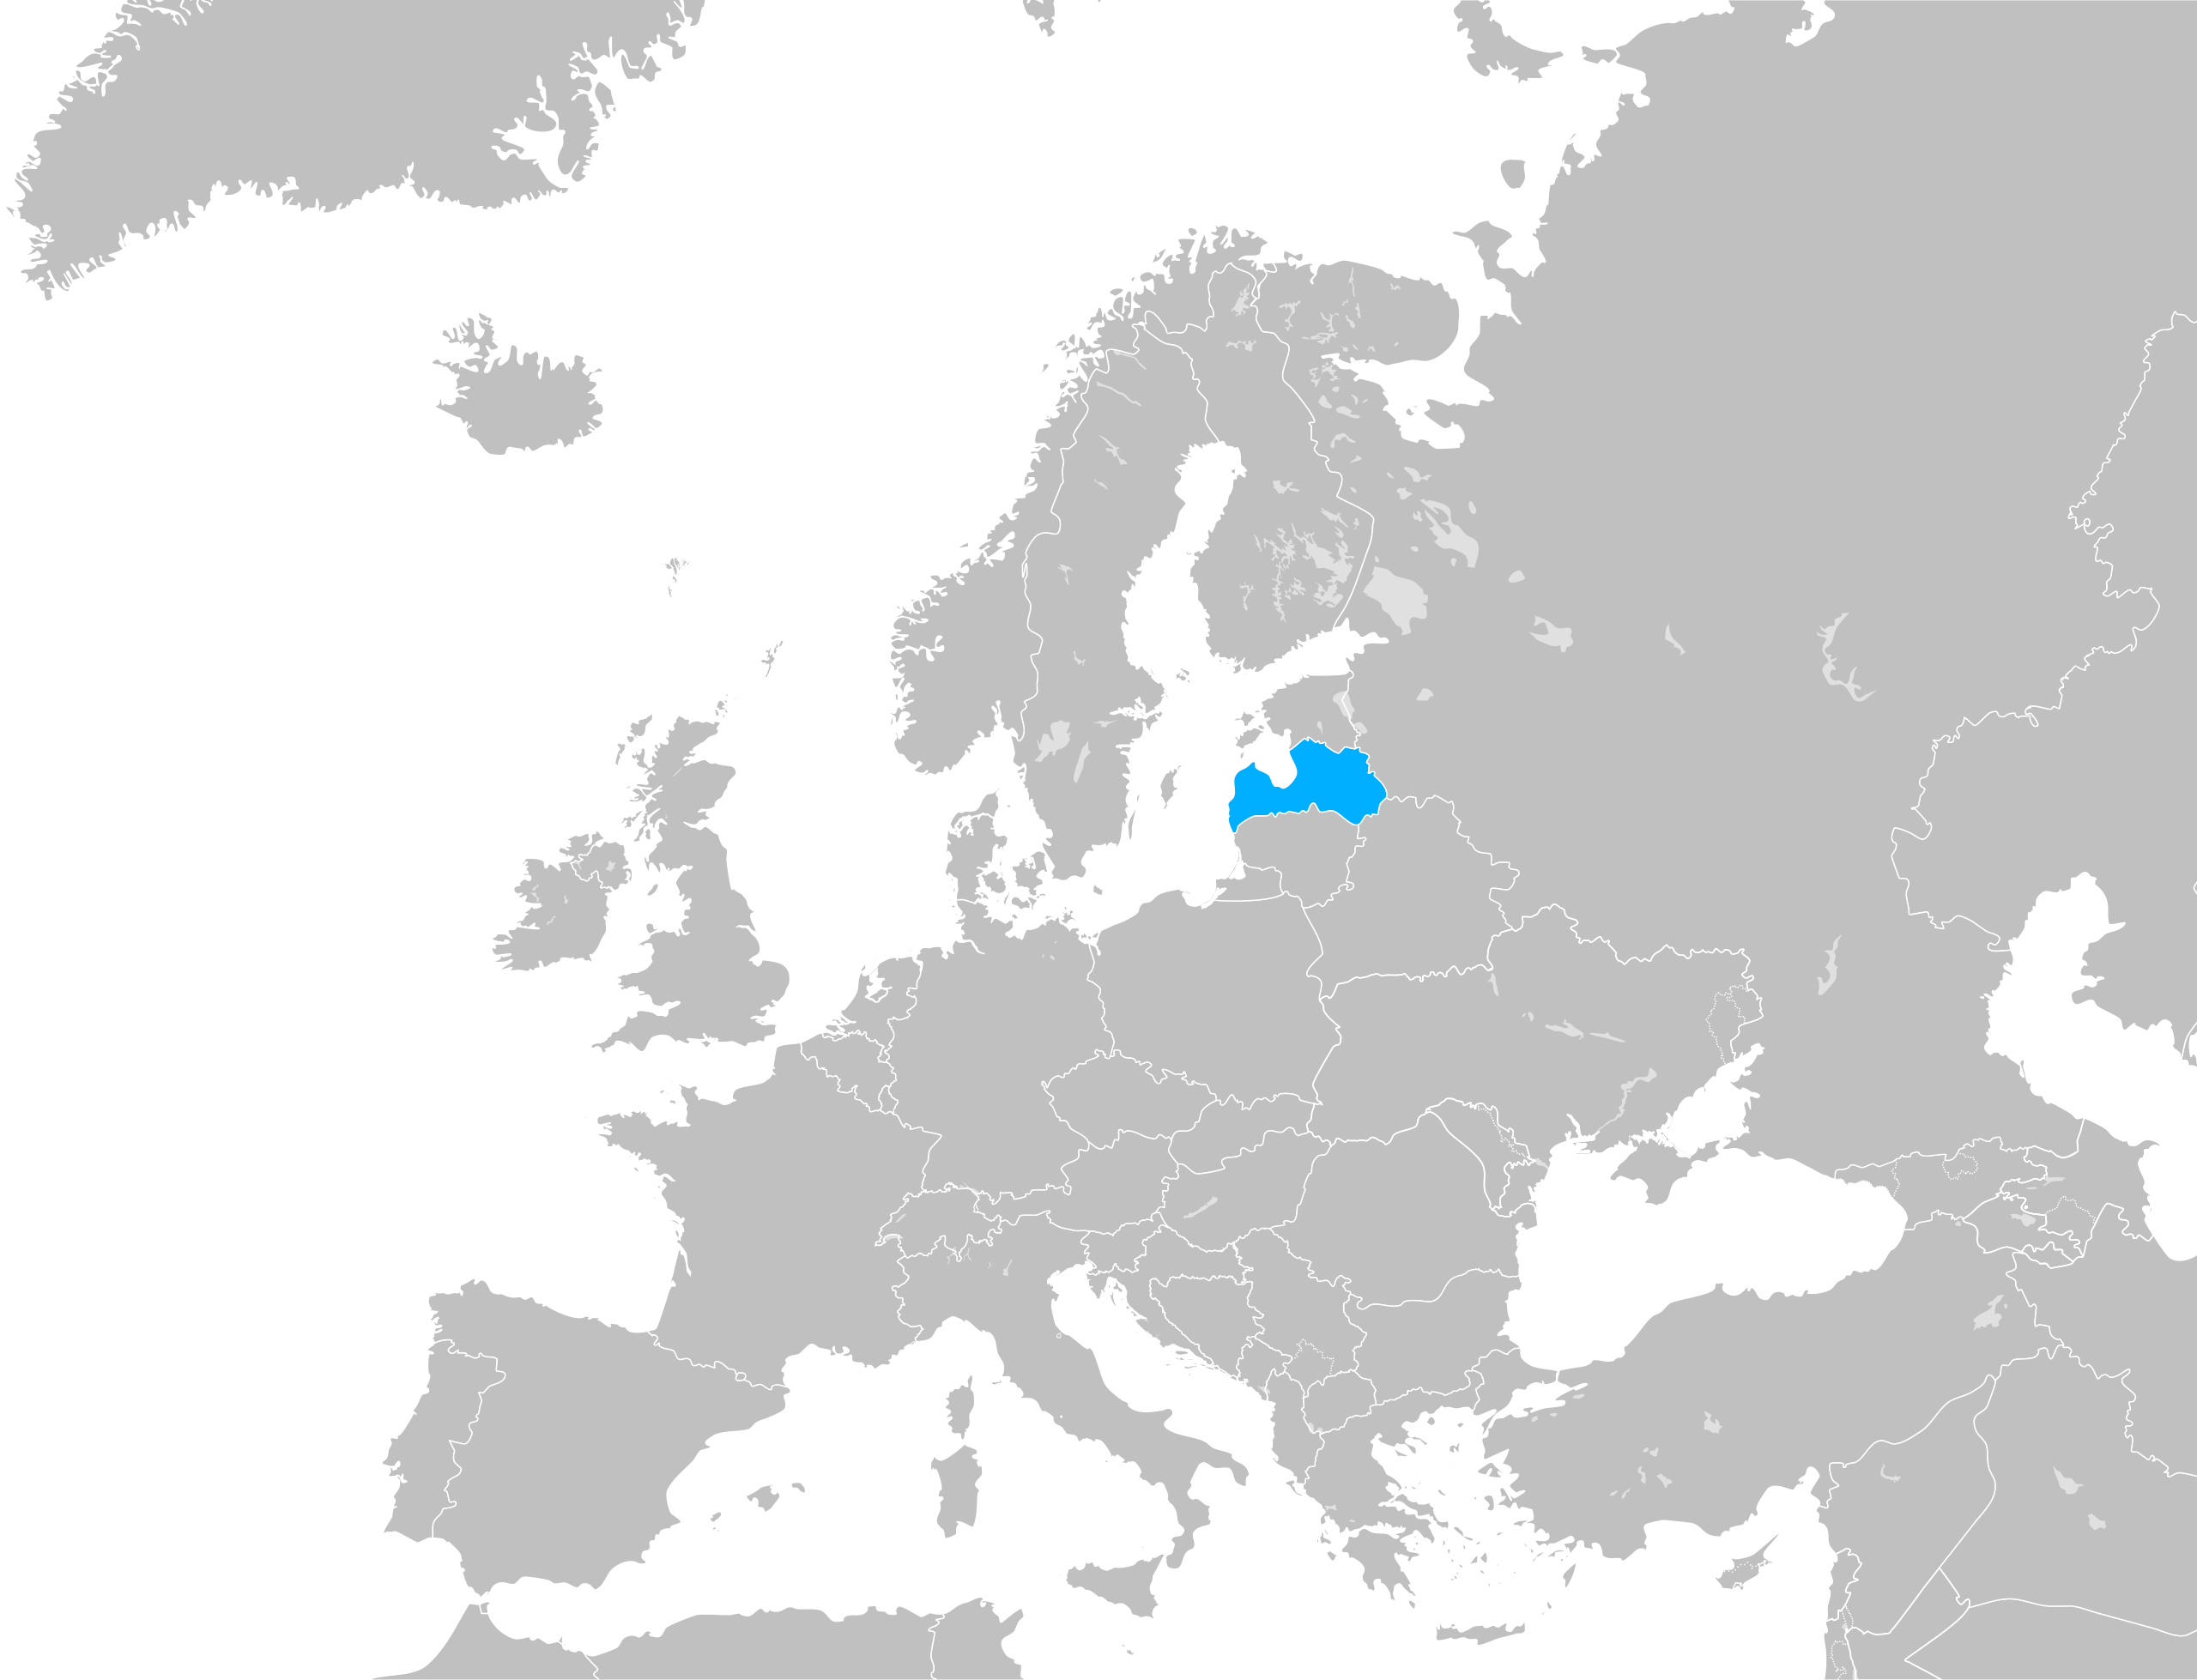 File:Europe Location LV.svg - Wikimedia Commons